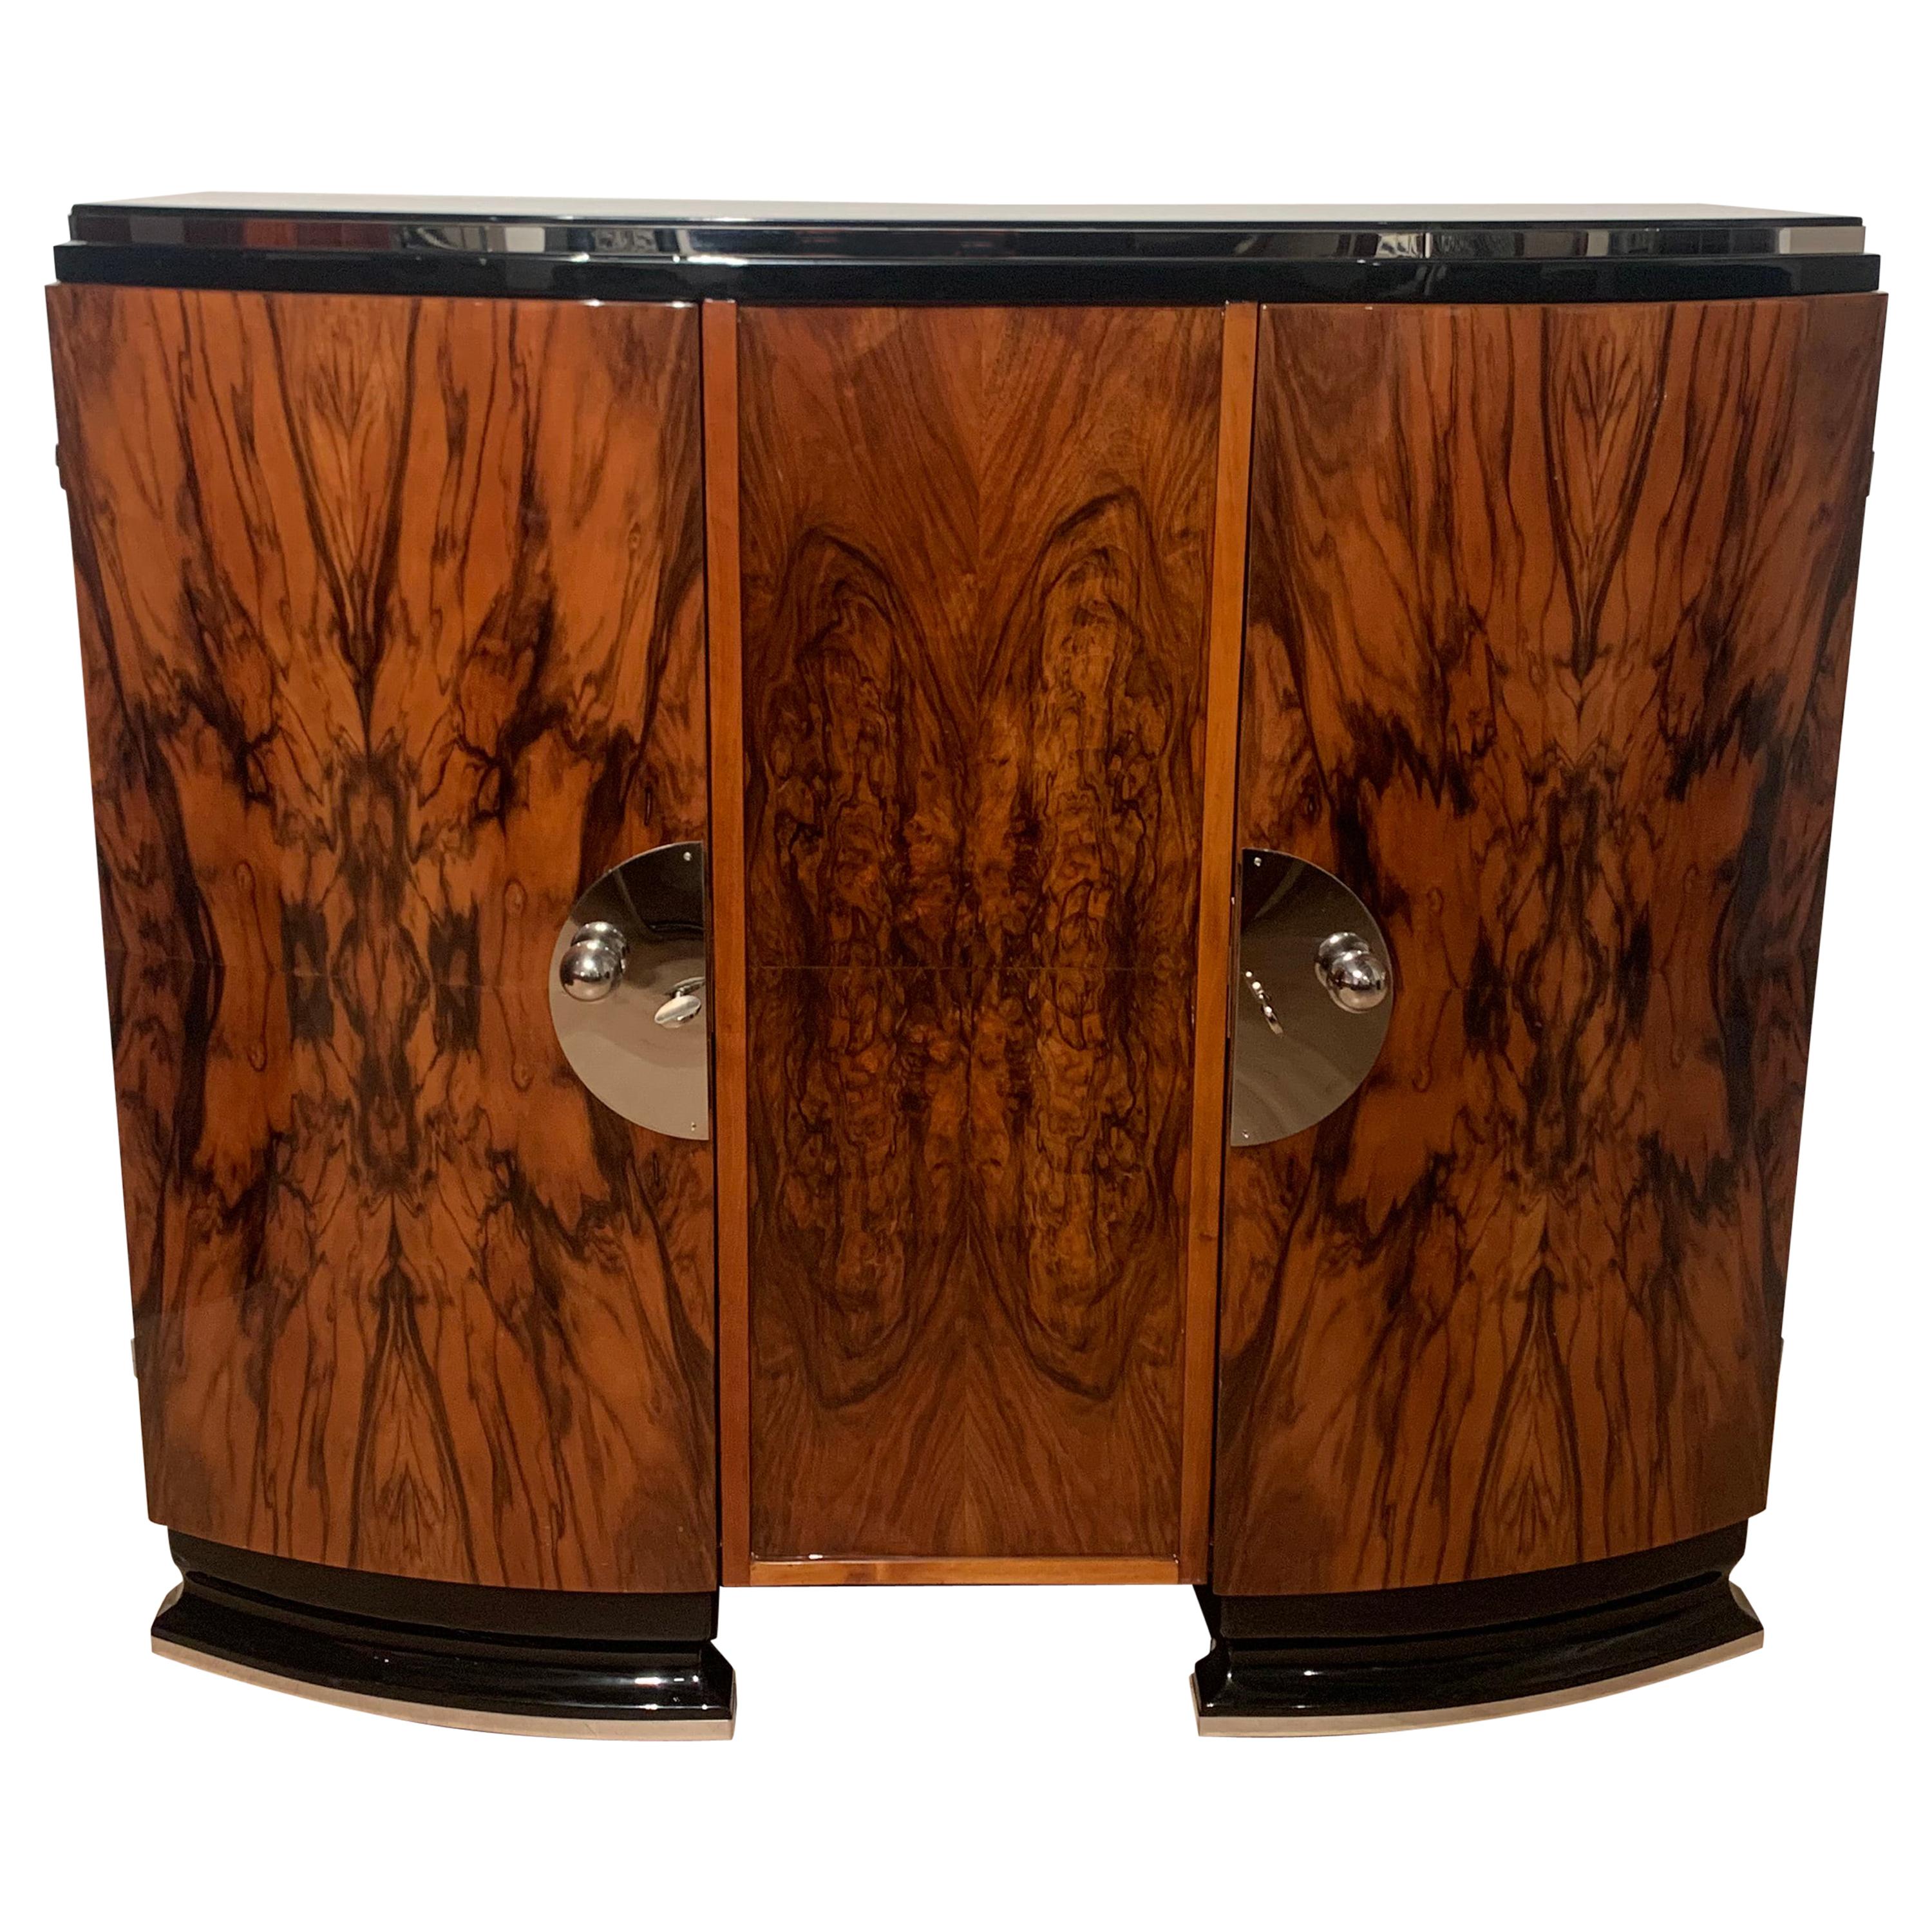 Small Art Deco Sideboard, Walnut Veneer, Chrome and Black Parts, France, 1930s